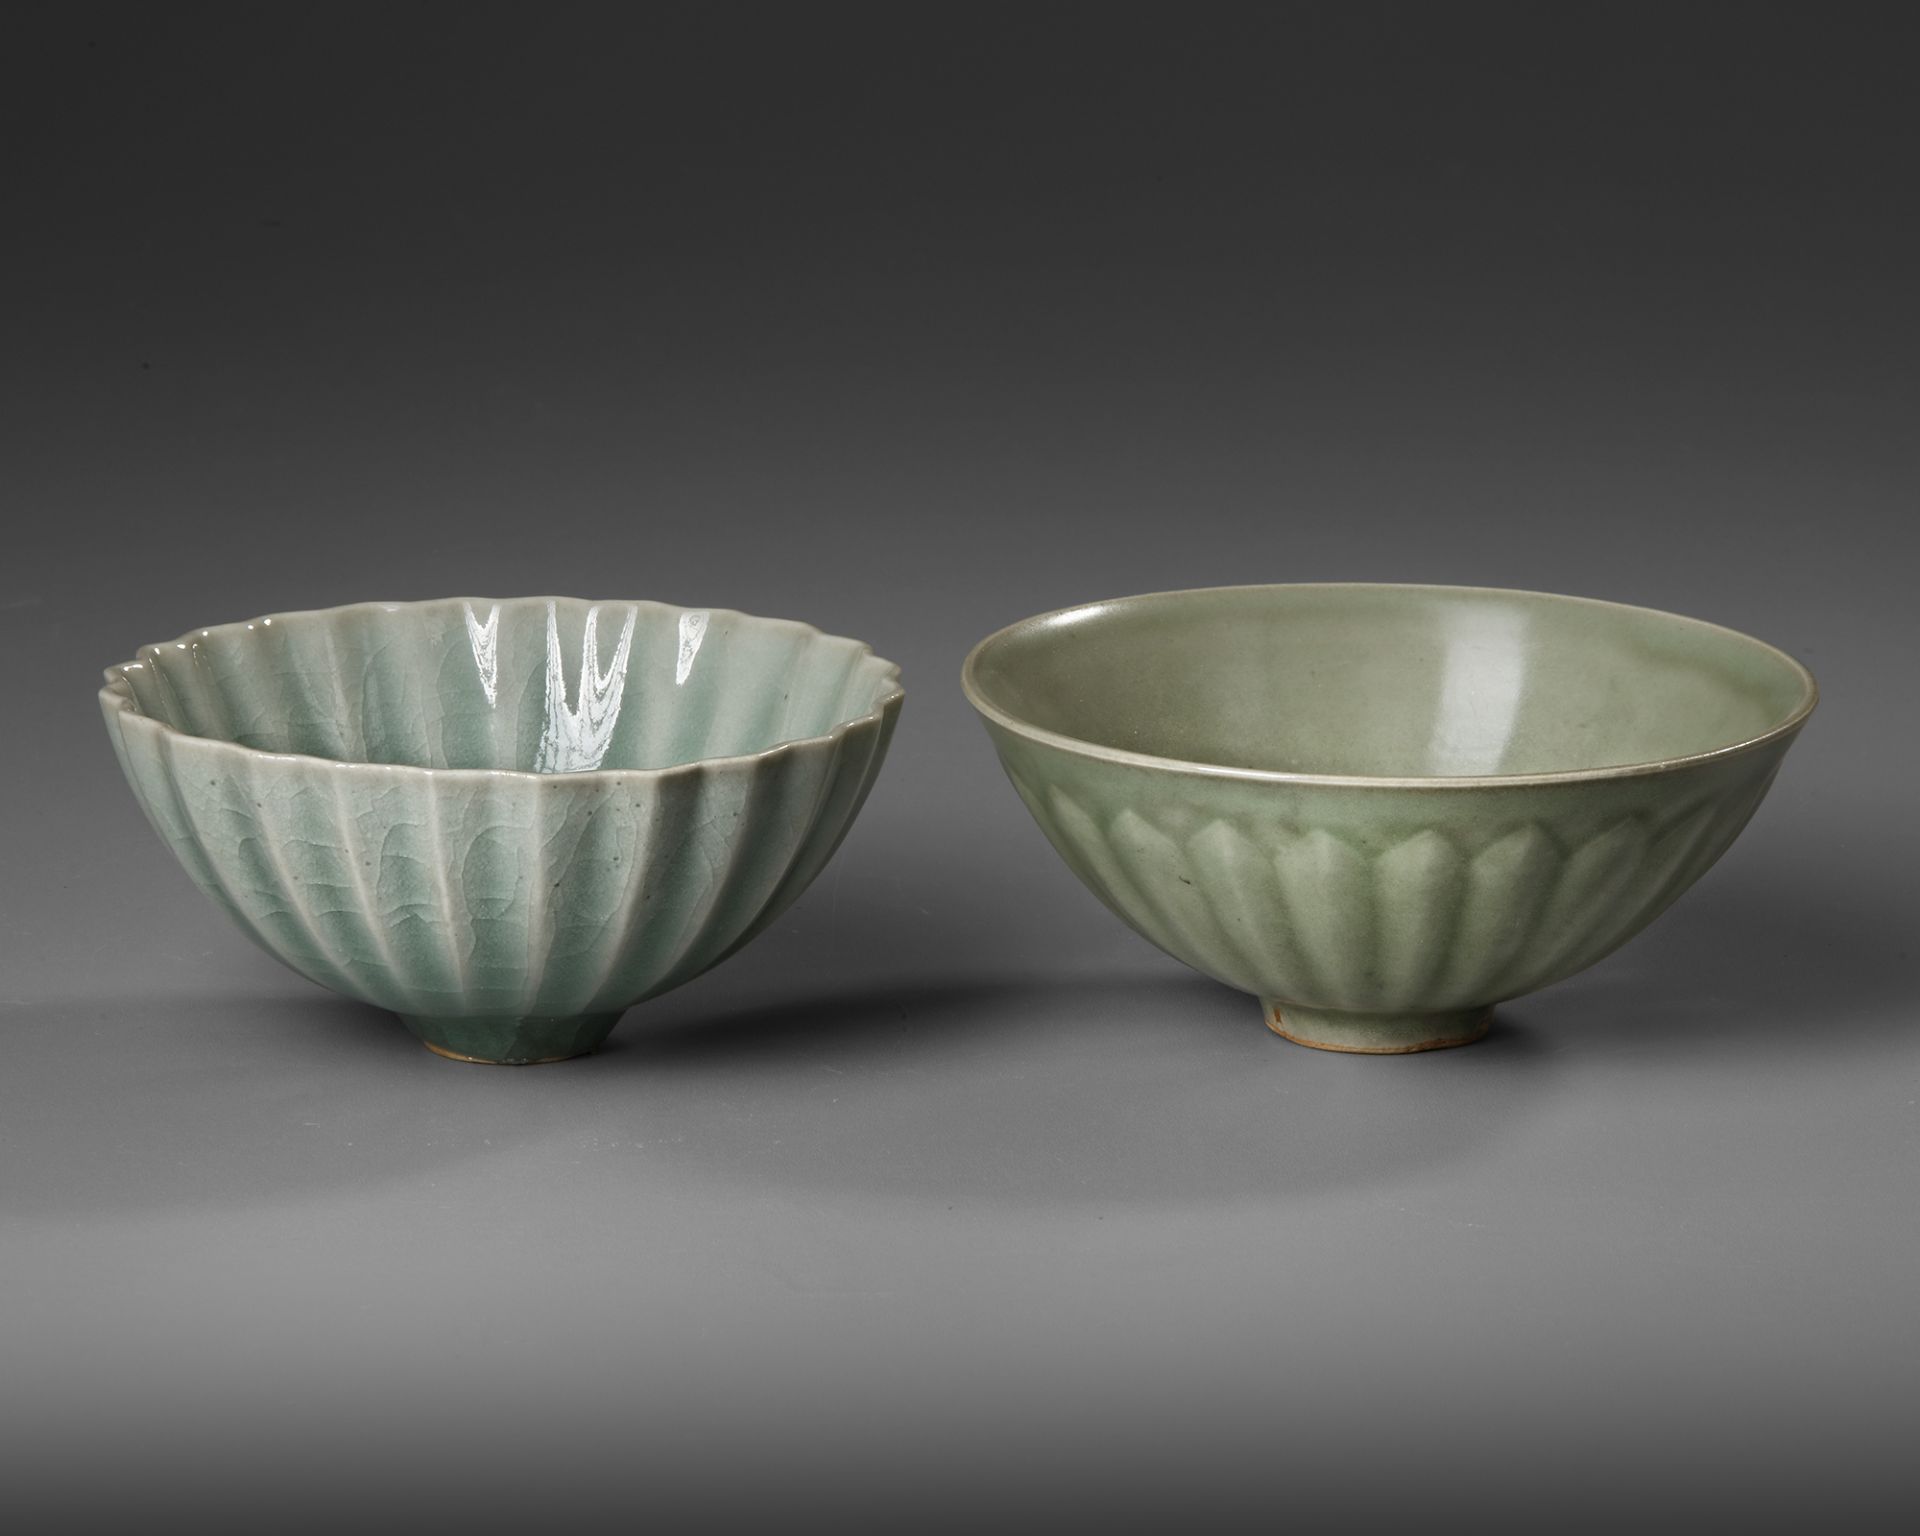 TWO CHINESE LONGQUAN PETAL-LOBED BOWLS, SONG DYNASTY (960-1279)